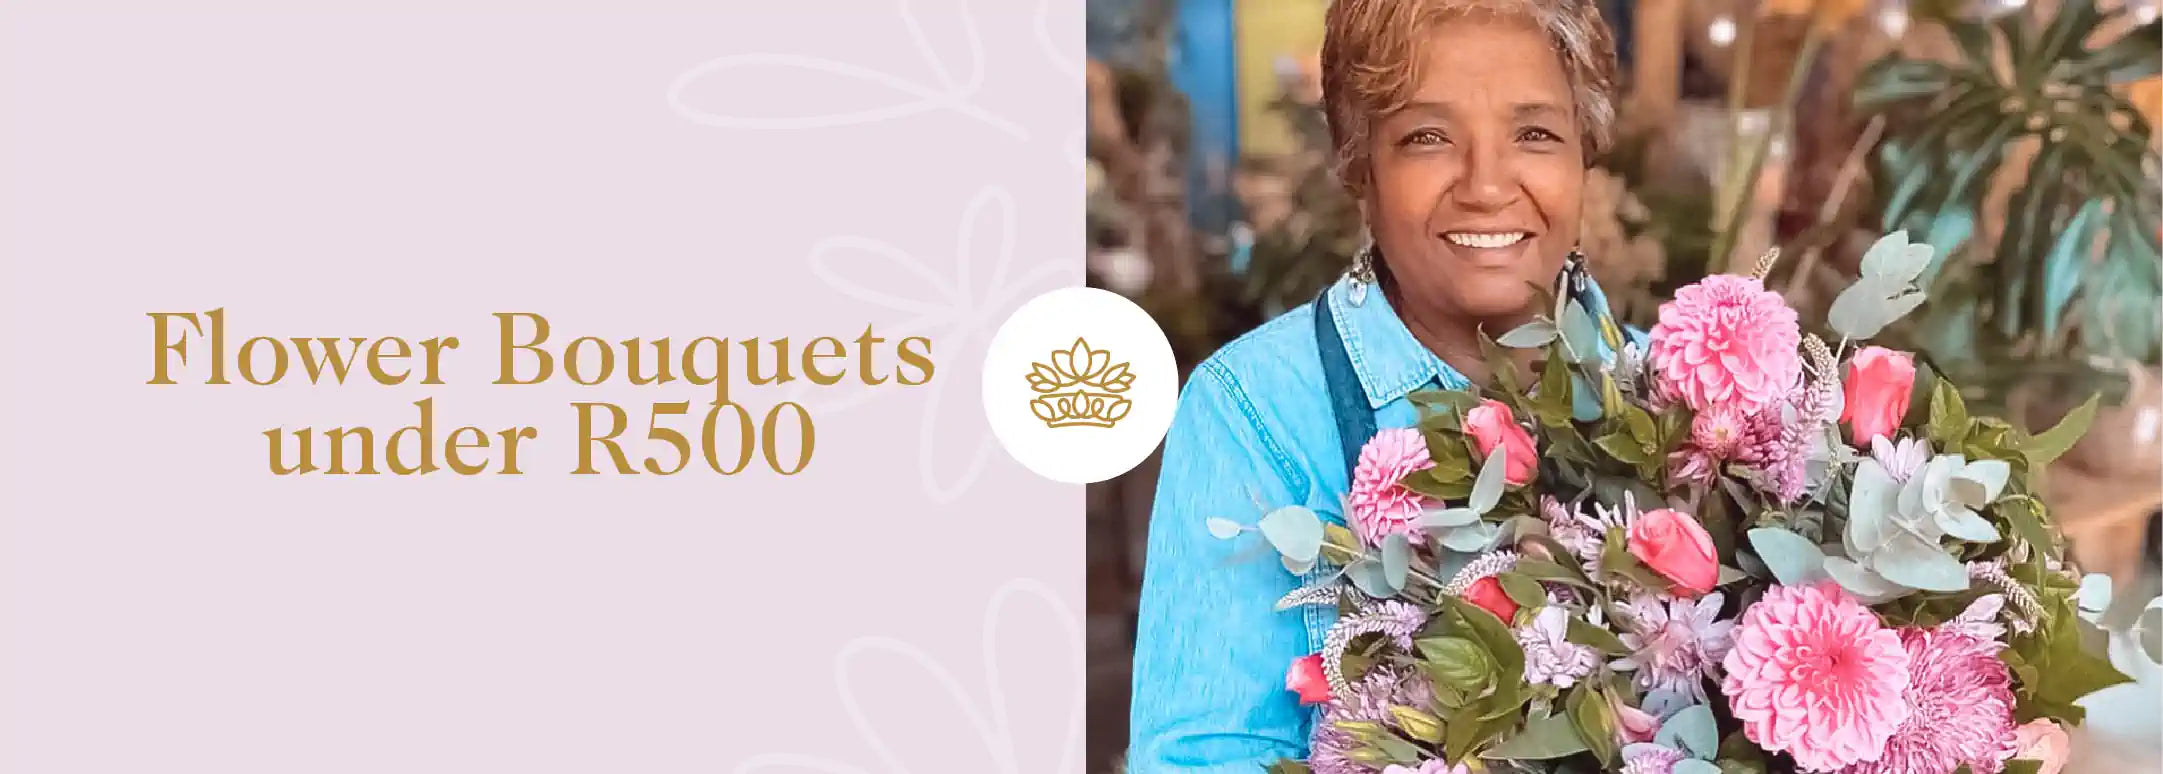 A delighted South African florist in a blue denim jacket holding a lush bouquet of pink dahlias and other mixed flowers, showcasing affordable yet exquisite options from the Flower Bouquets under R500 Collection. Fabulous Flowers and Gifts.